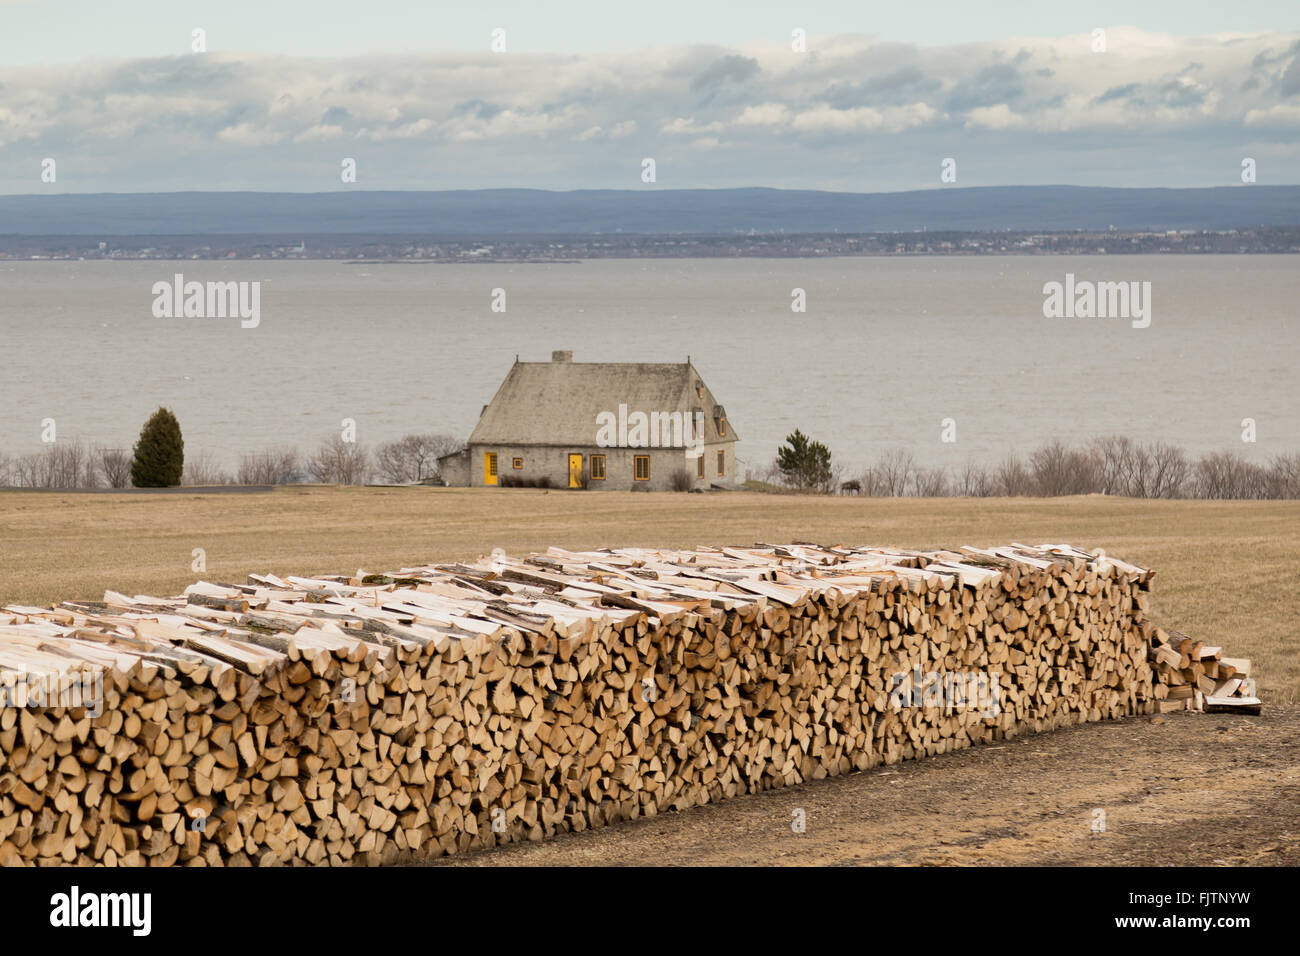 Long pile of cut firewood logs and stone house in a field on the St Lawrence River, Ile d'Orleans, Quebec, Canada. Stock Photo